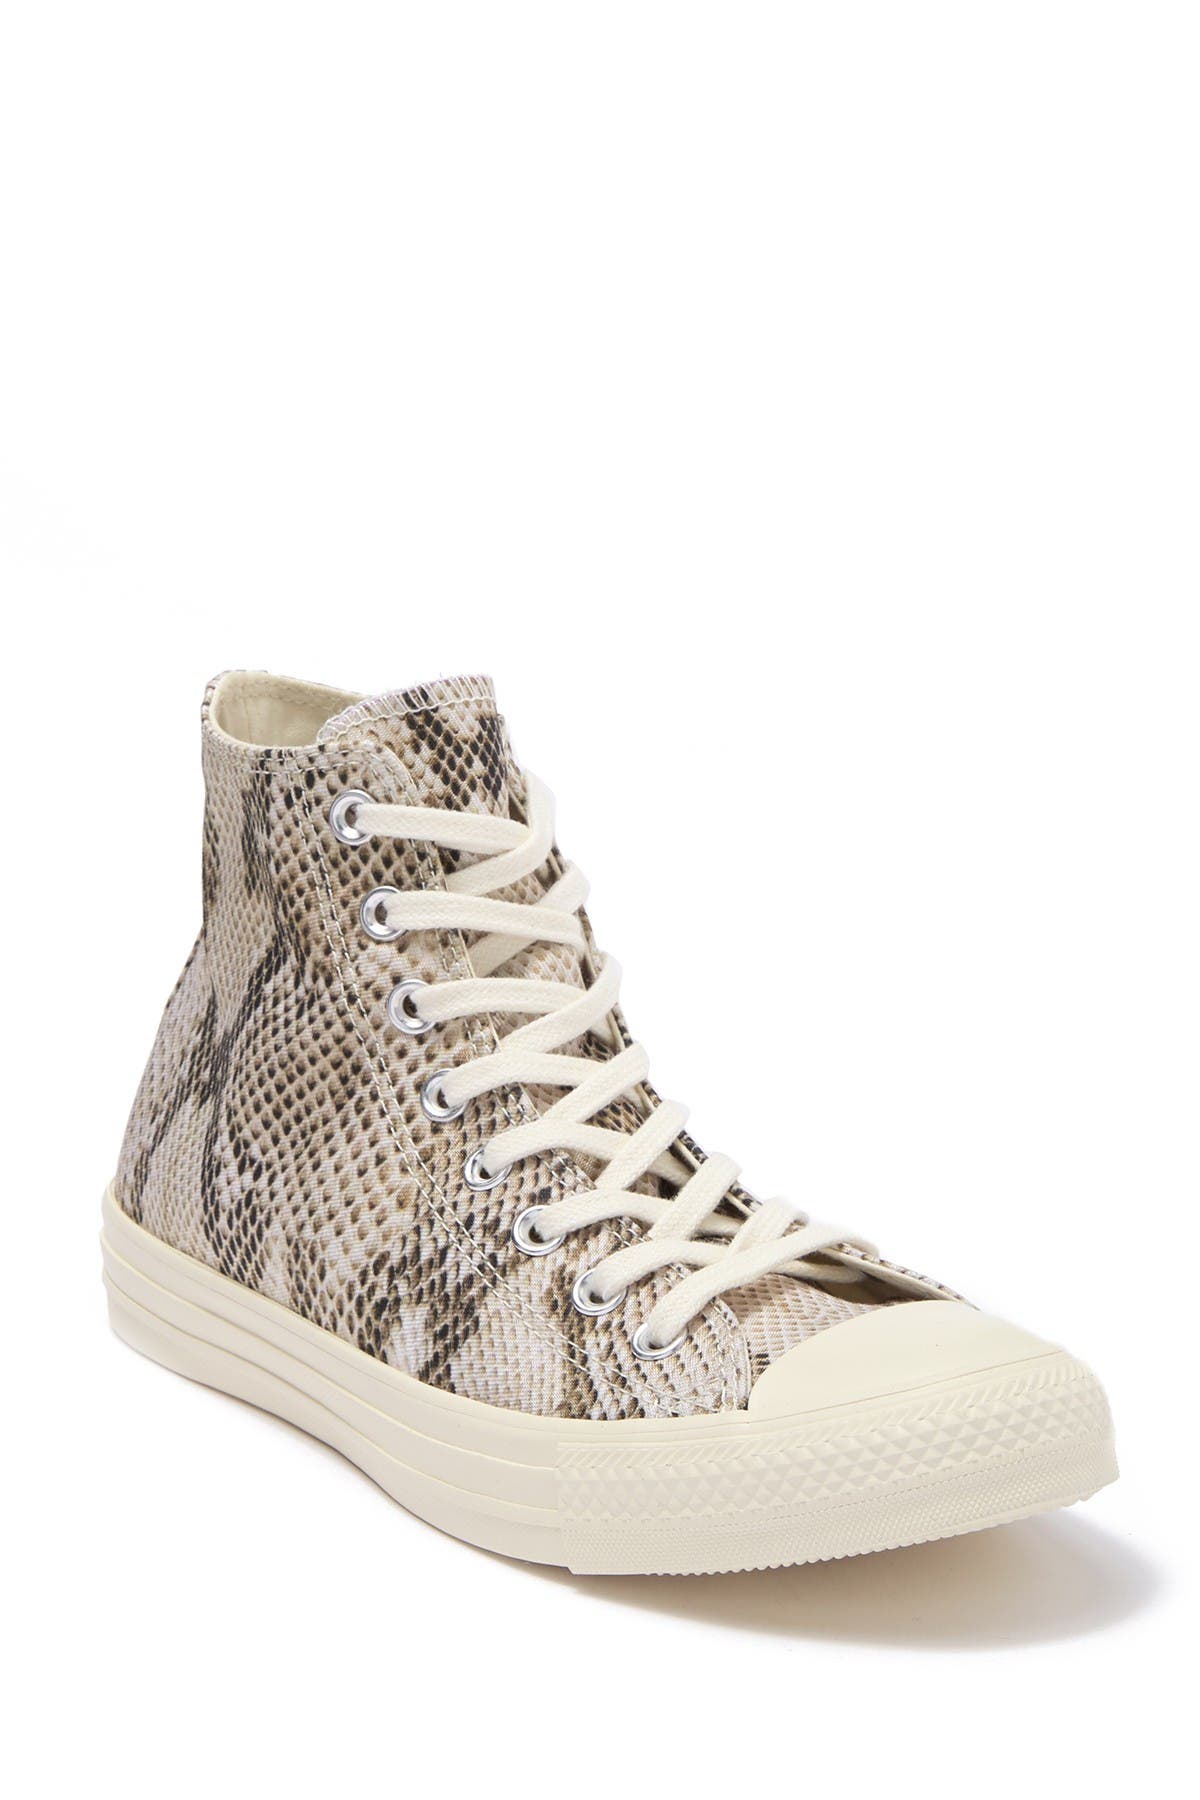 chuck taylor all star high top printed sneaker